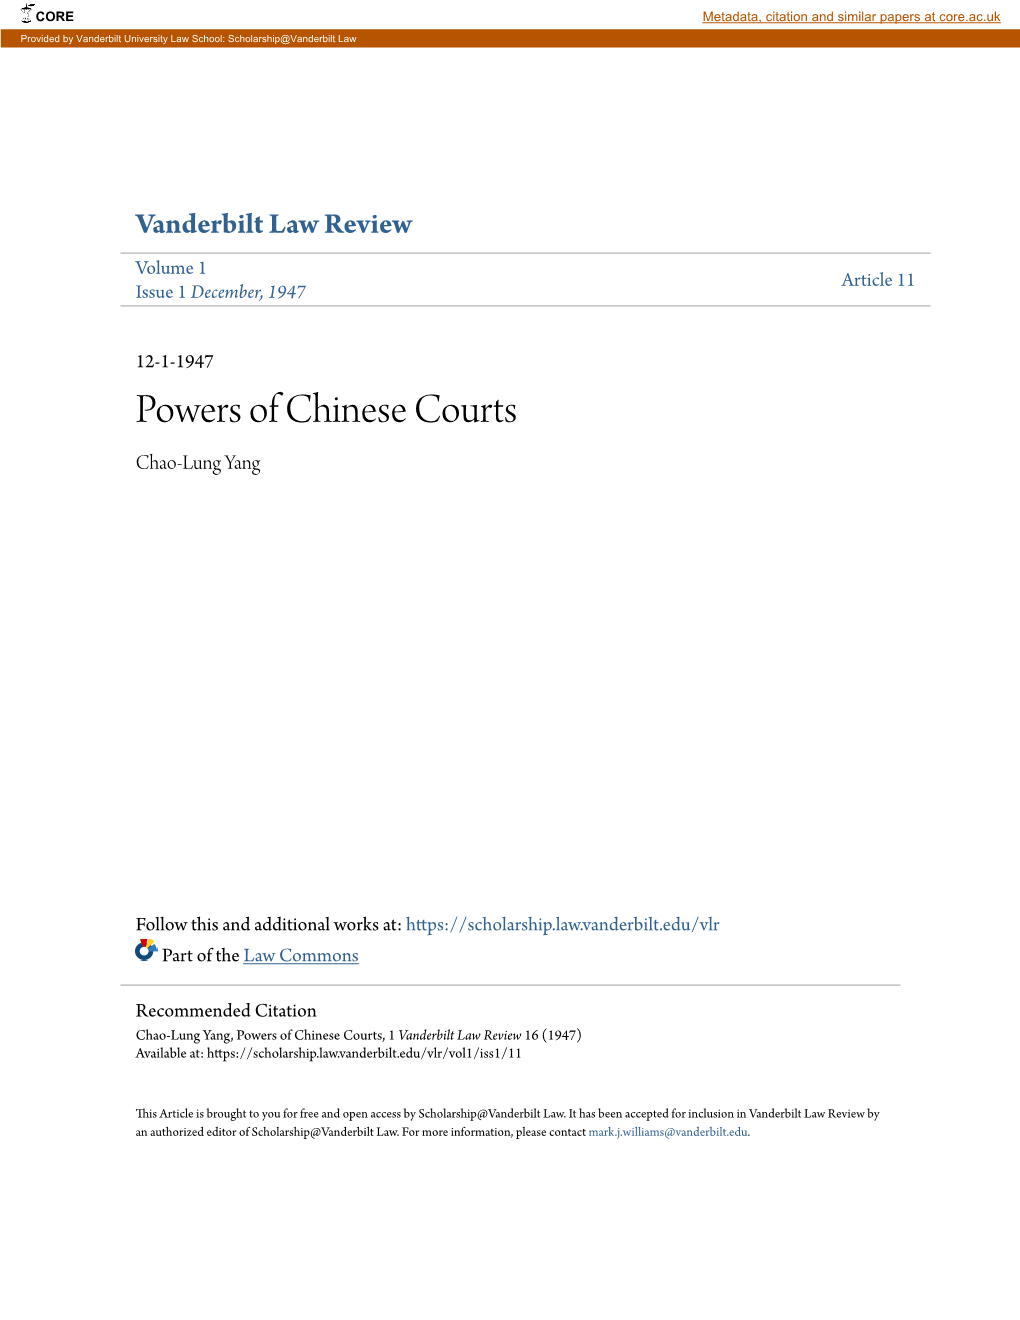 Powers of Chinese Courts Chao-Lung Yang